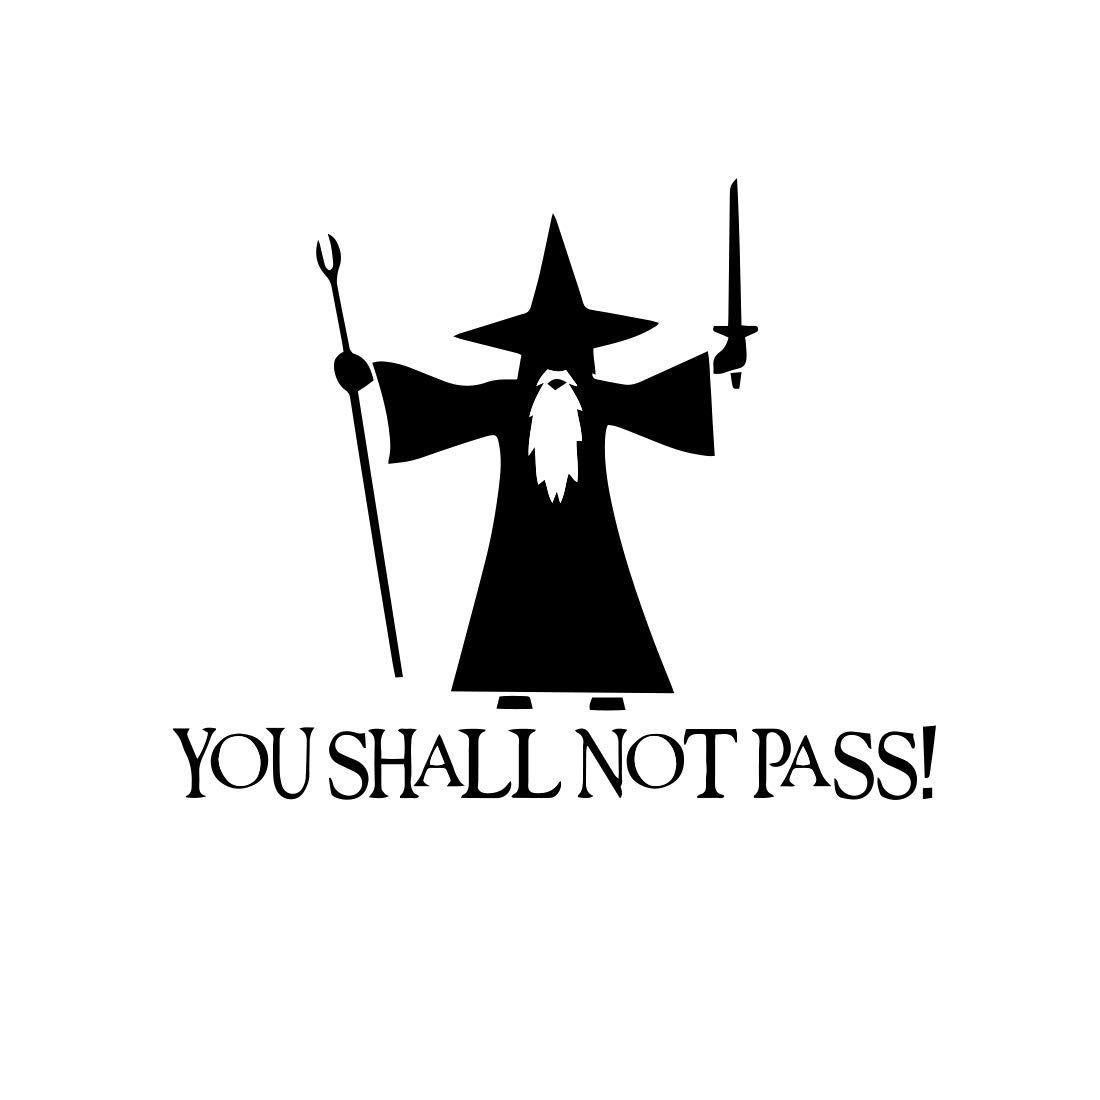 Lotr Logo - Bargain Max Decals Shall Not Pass! LOTR Sticker Decal Notebook Car Lap (Black)